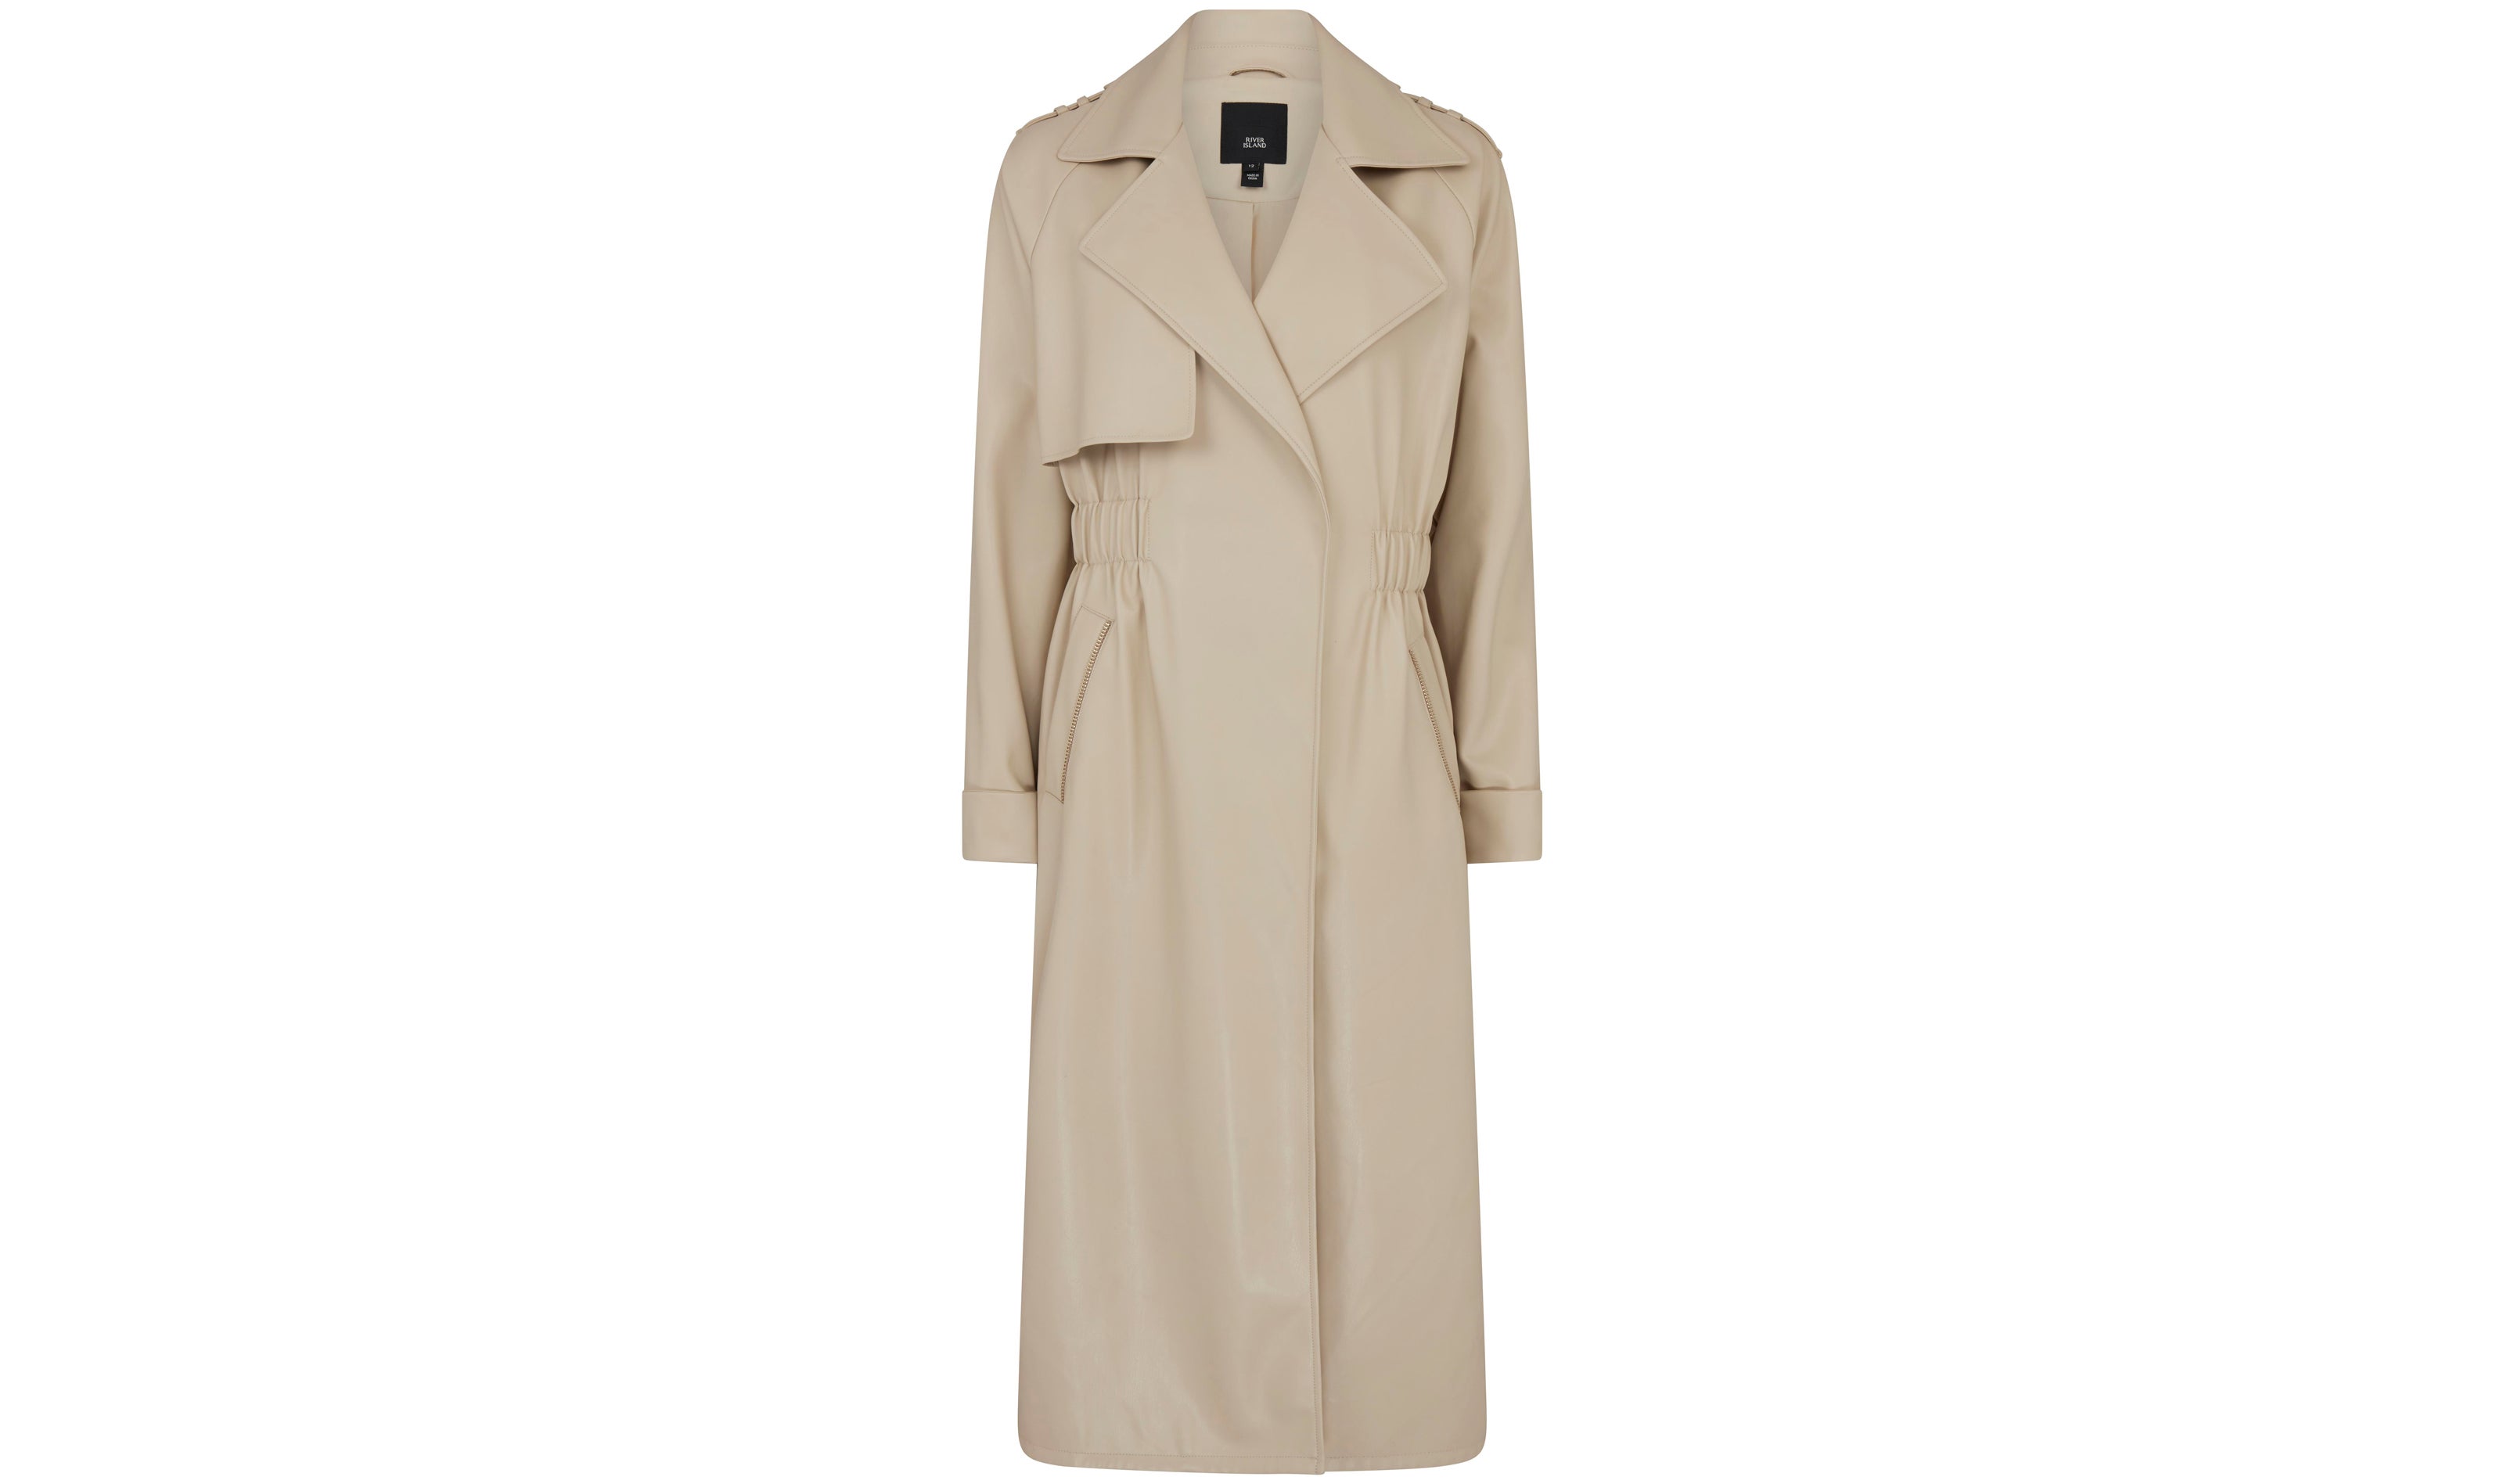 River Island Faux Leather Trench Coat in Stone, £80